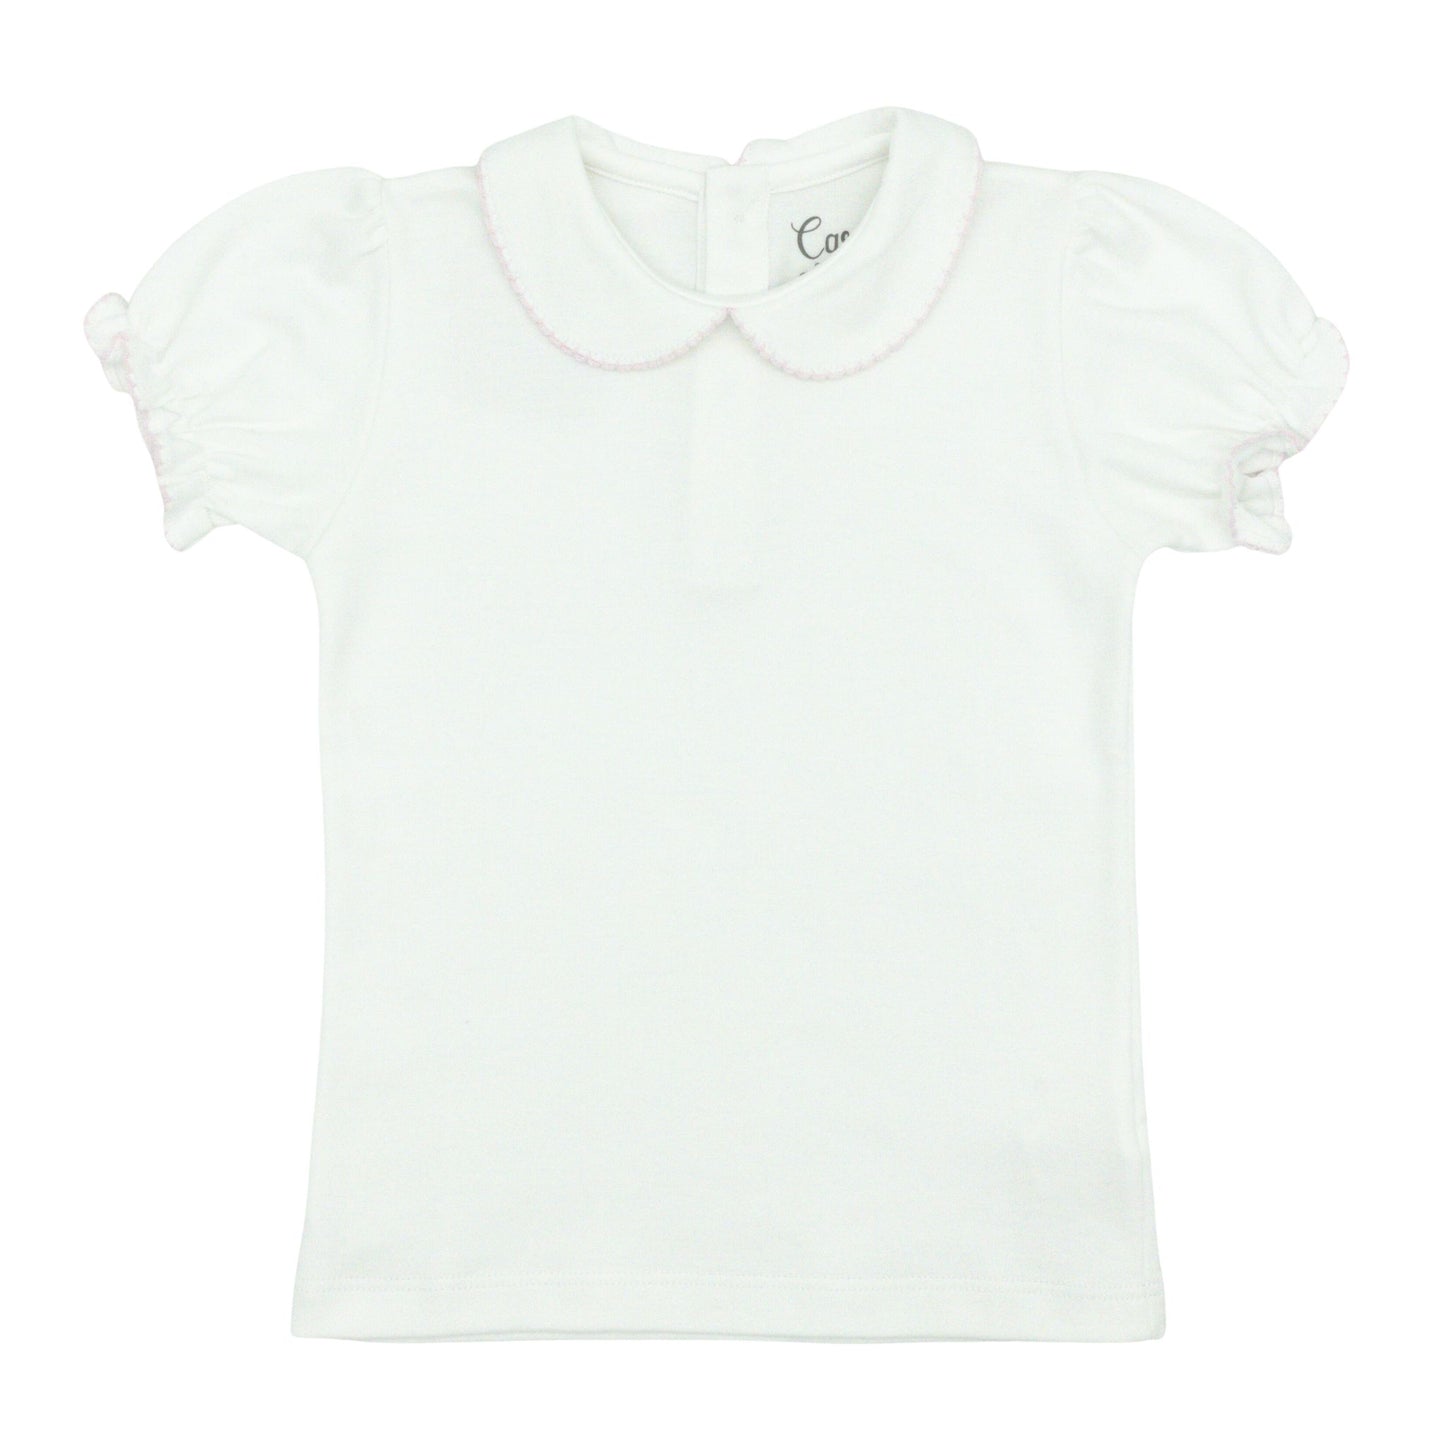 Girls Peter Pan Collared Blouse with Short-sleeves